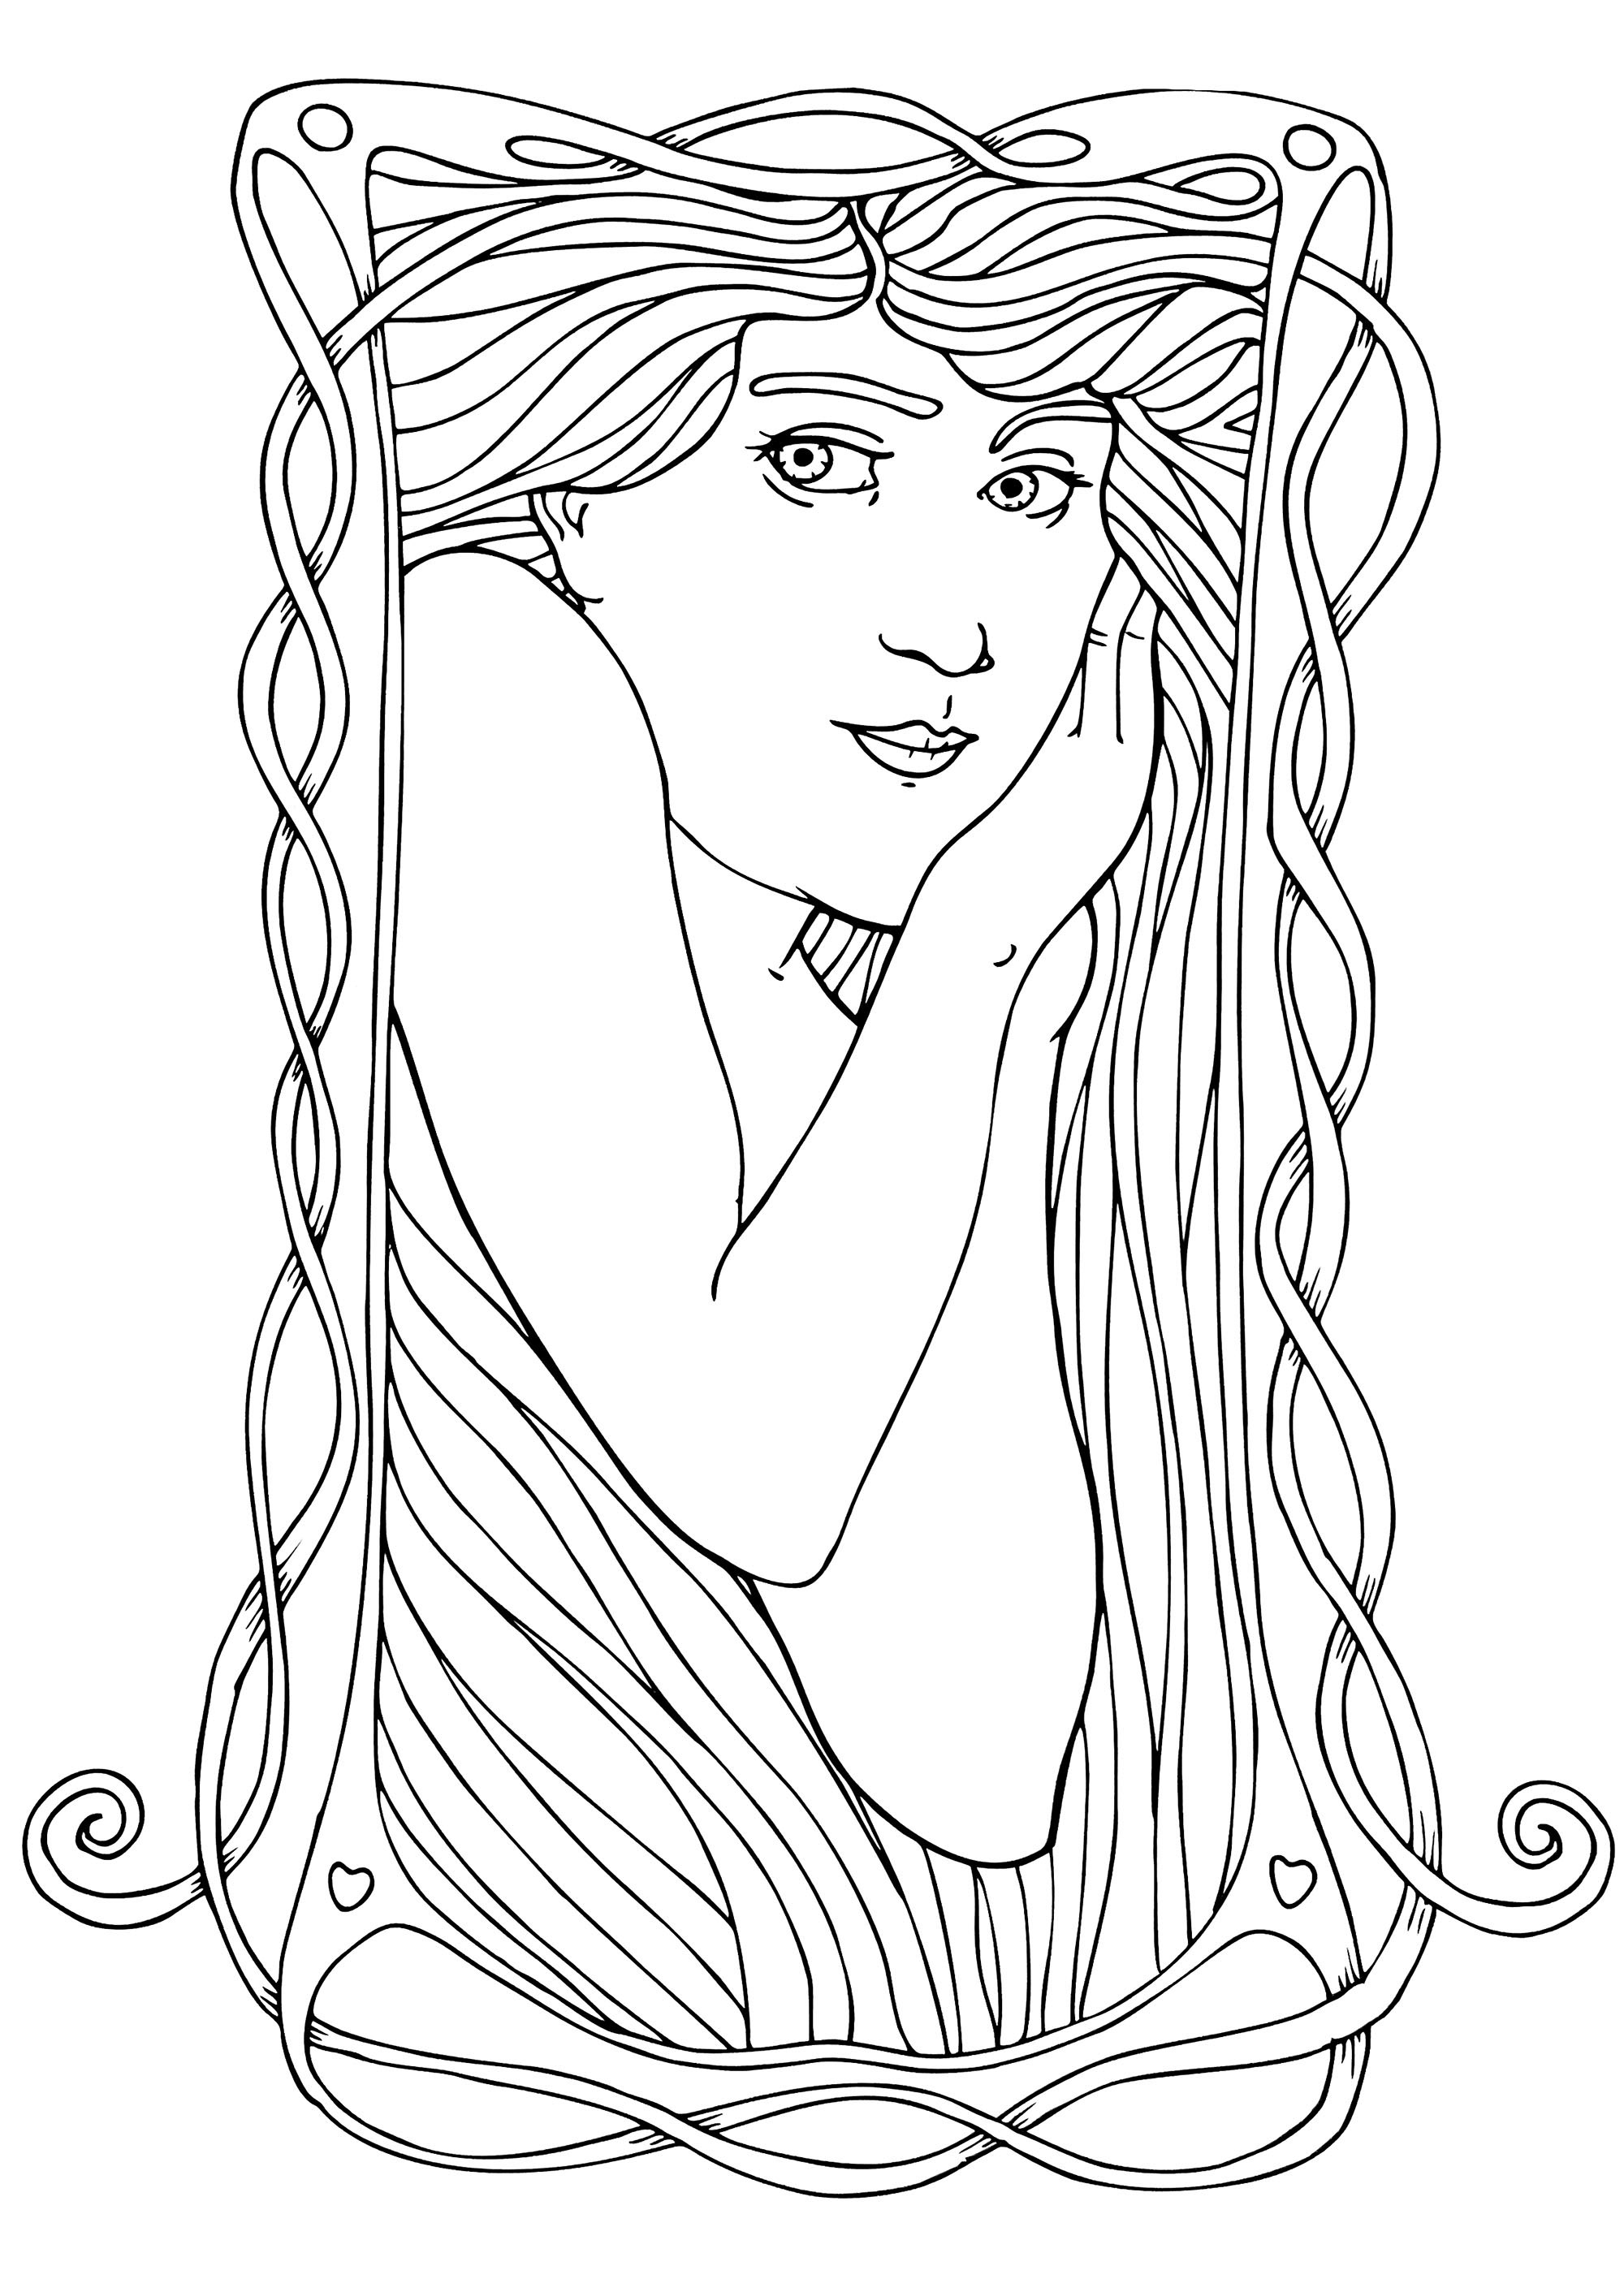 Simple Art Nouveau coloring page to download for free